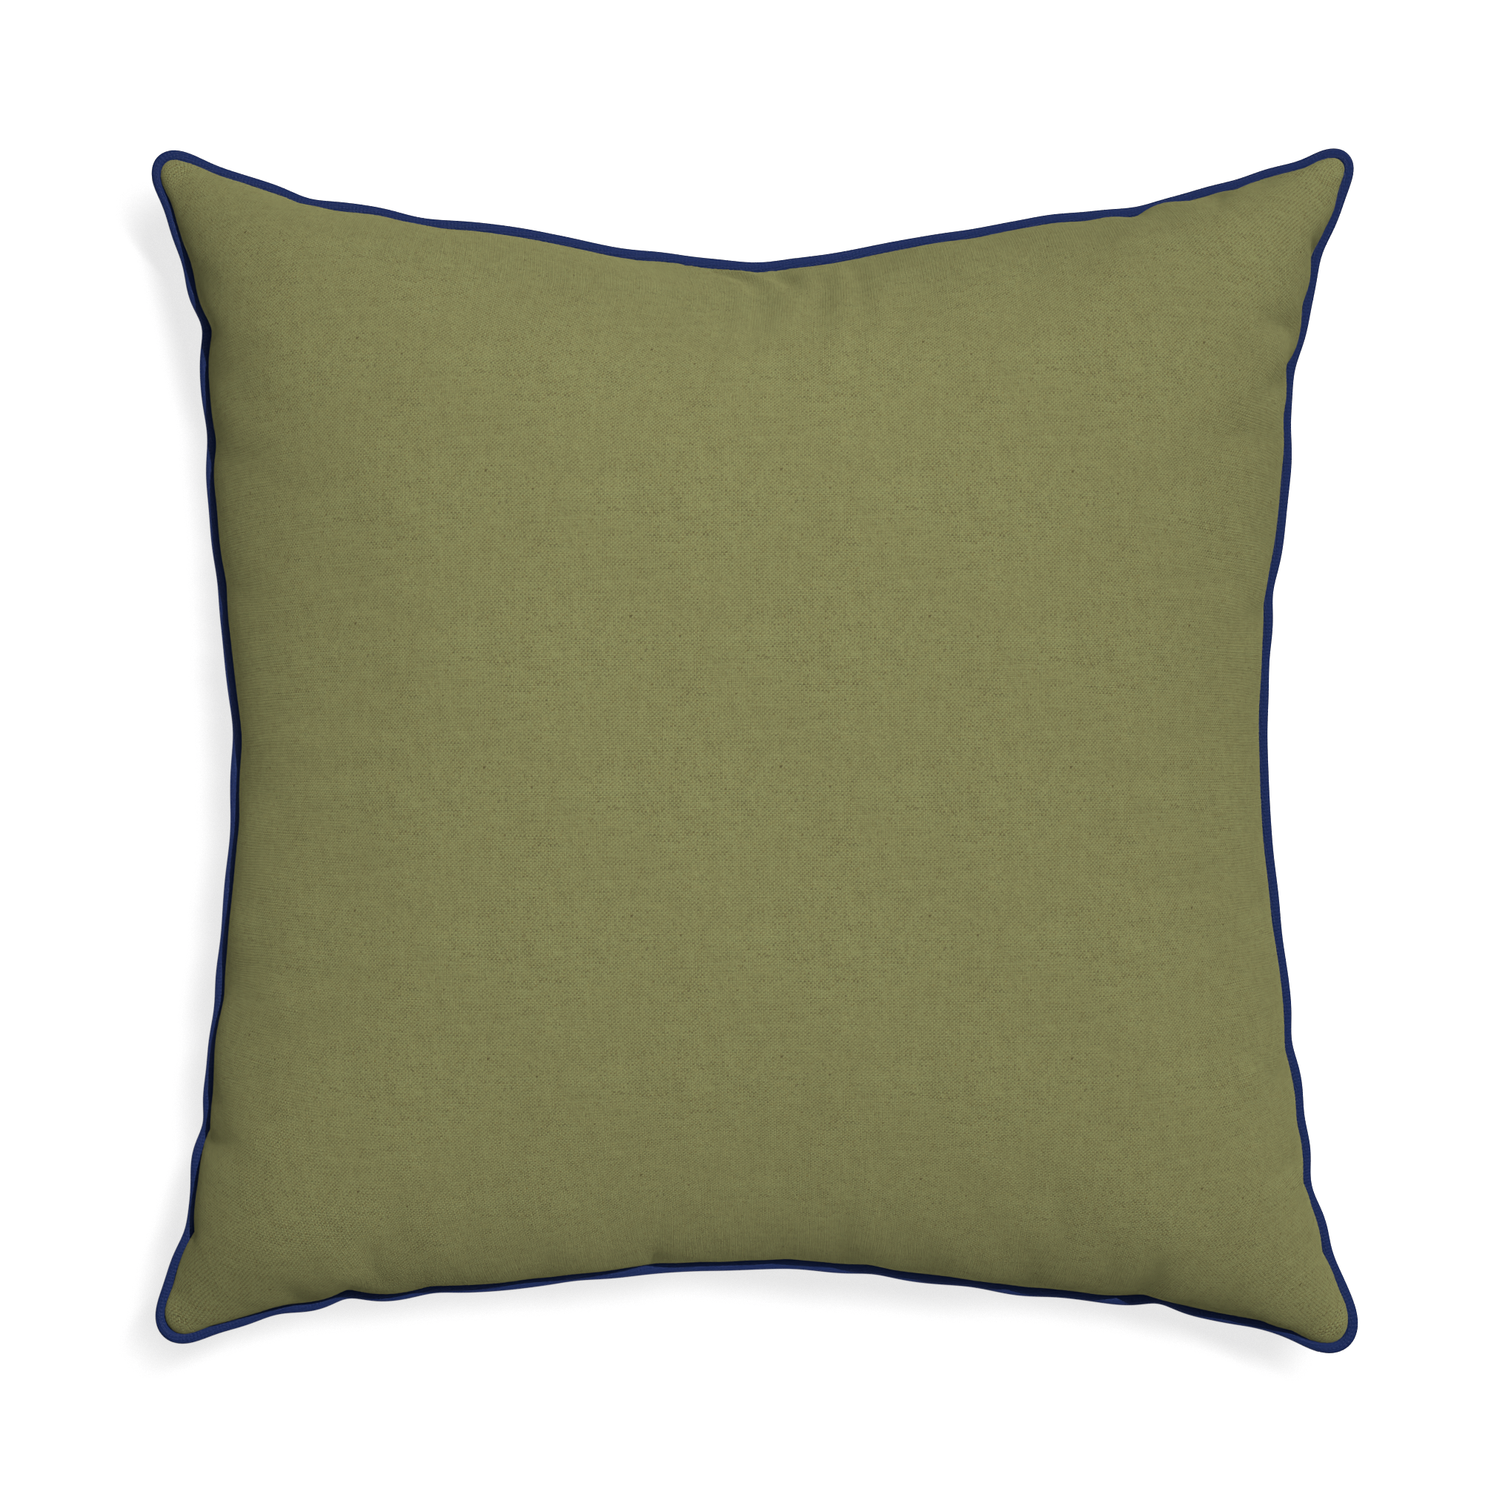 Euro-sham moss custom moss greenpillow with midnight piping on white background